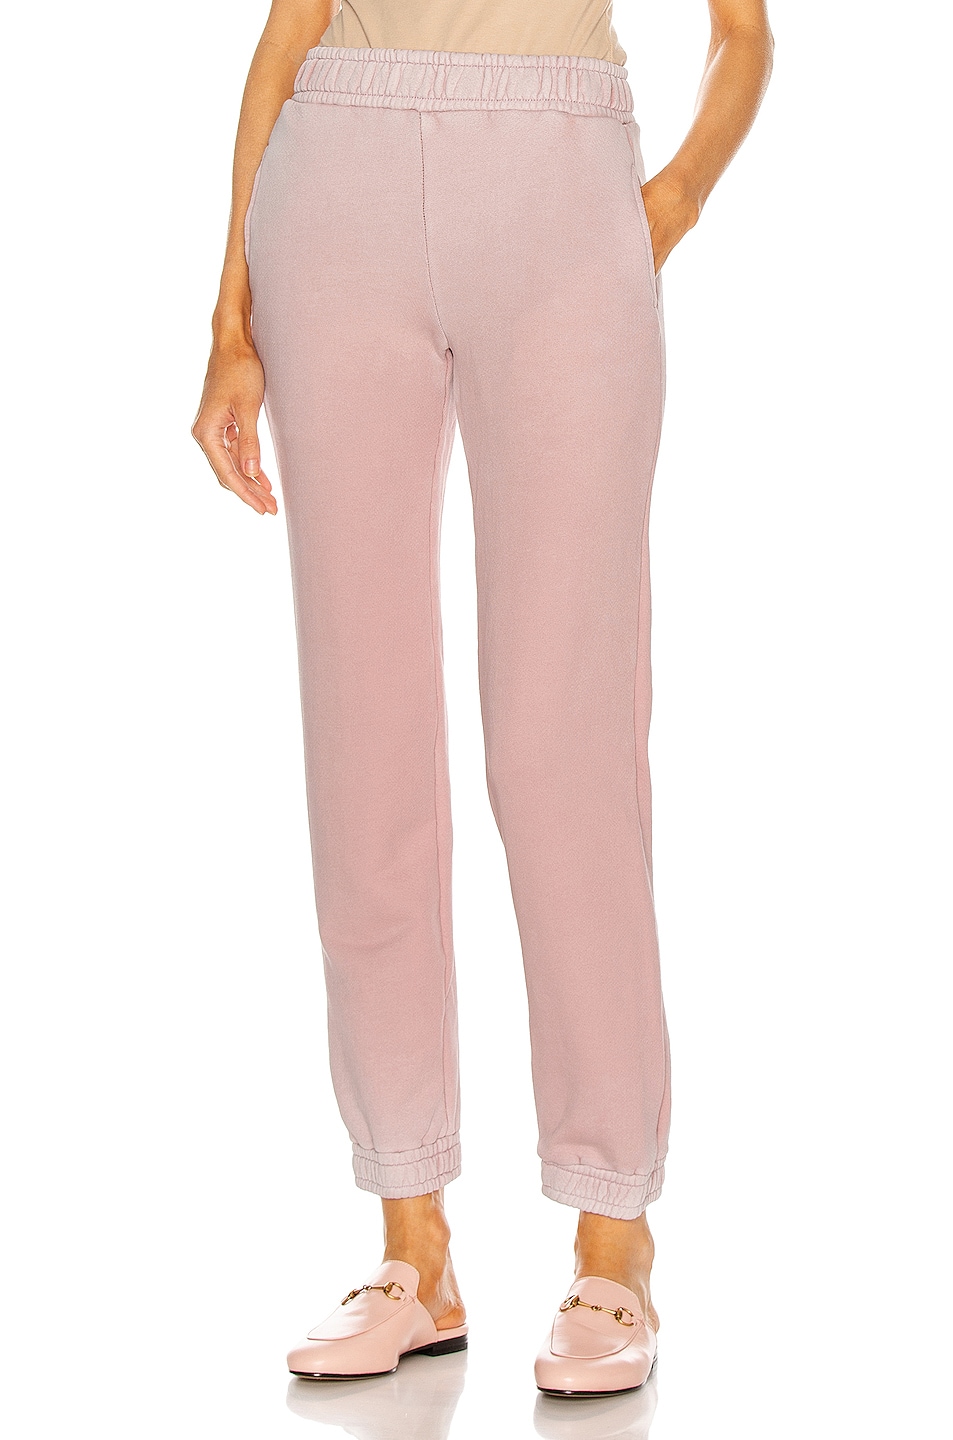 Image 1 of COTTON CITIZEN Brooklyn Sweatpant in Vintage Rose